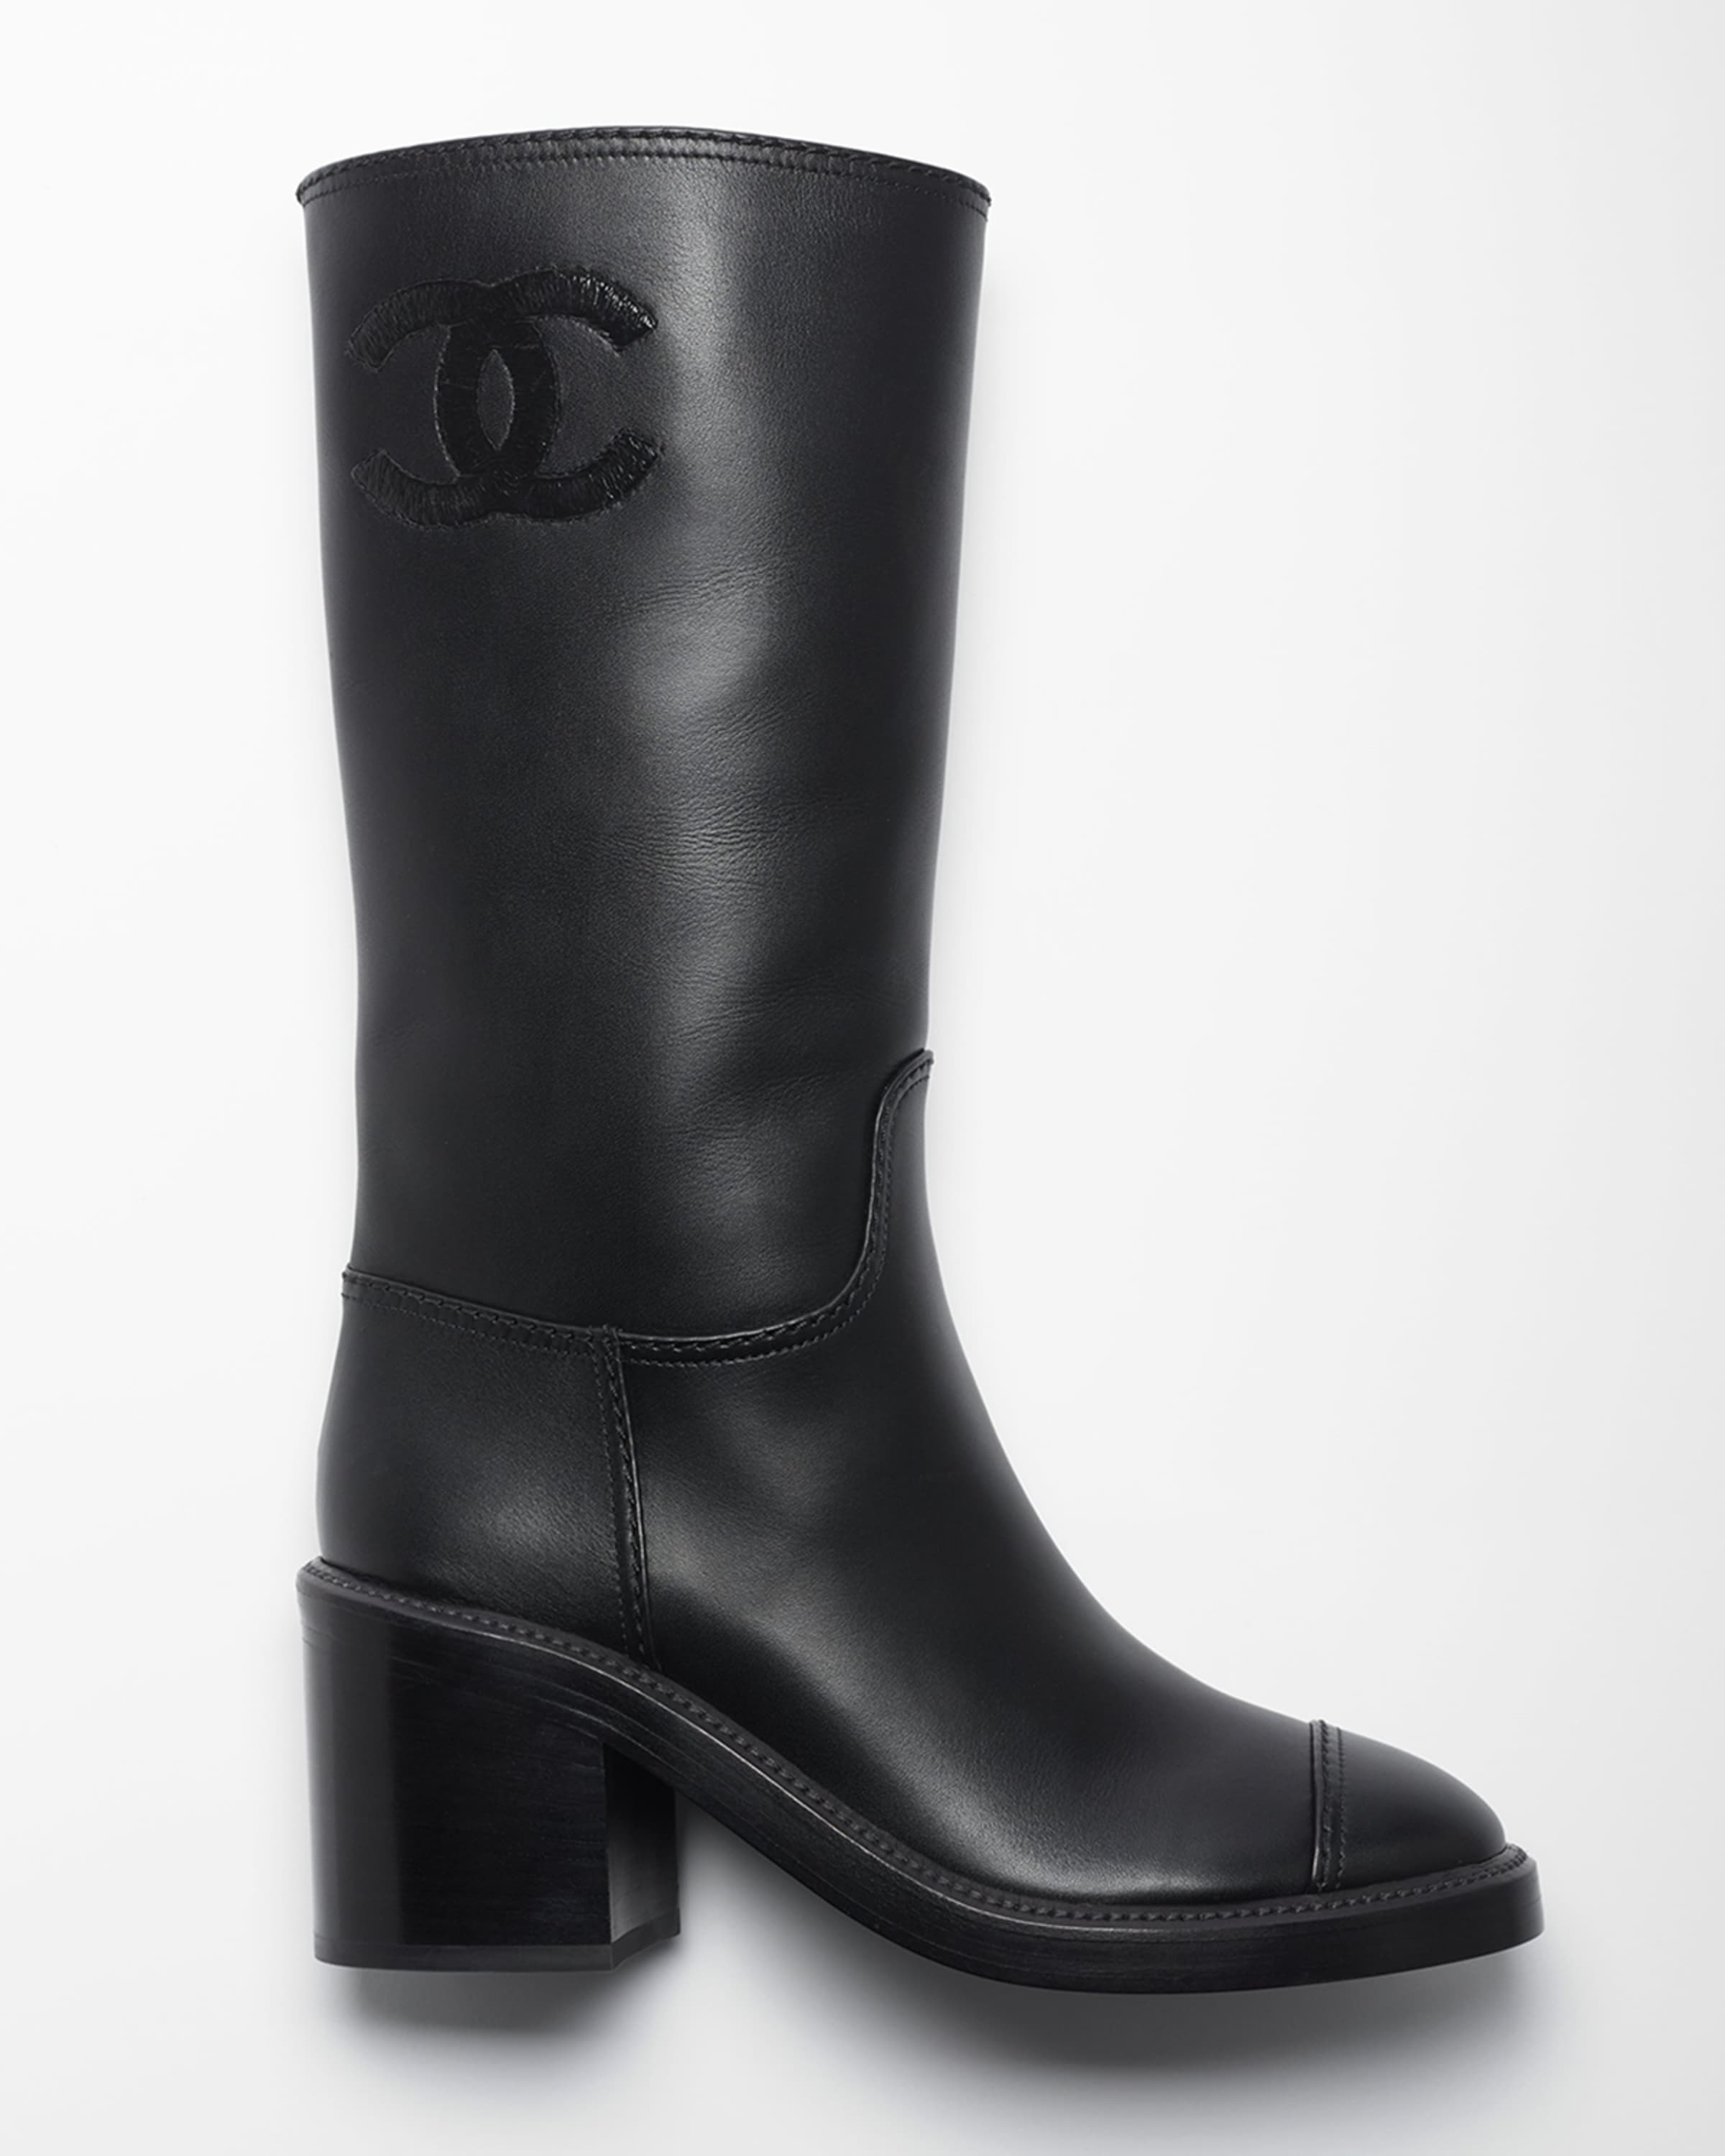 CHANEL HIGH BOOTS